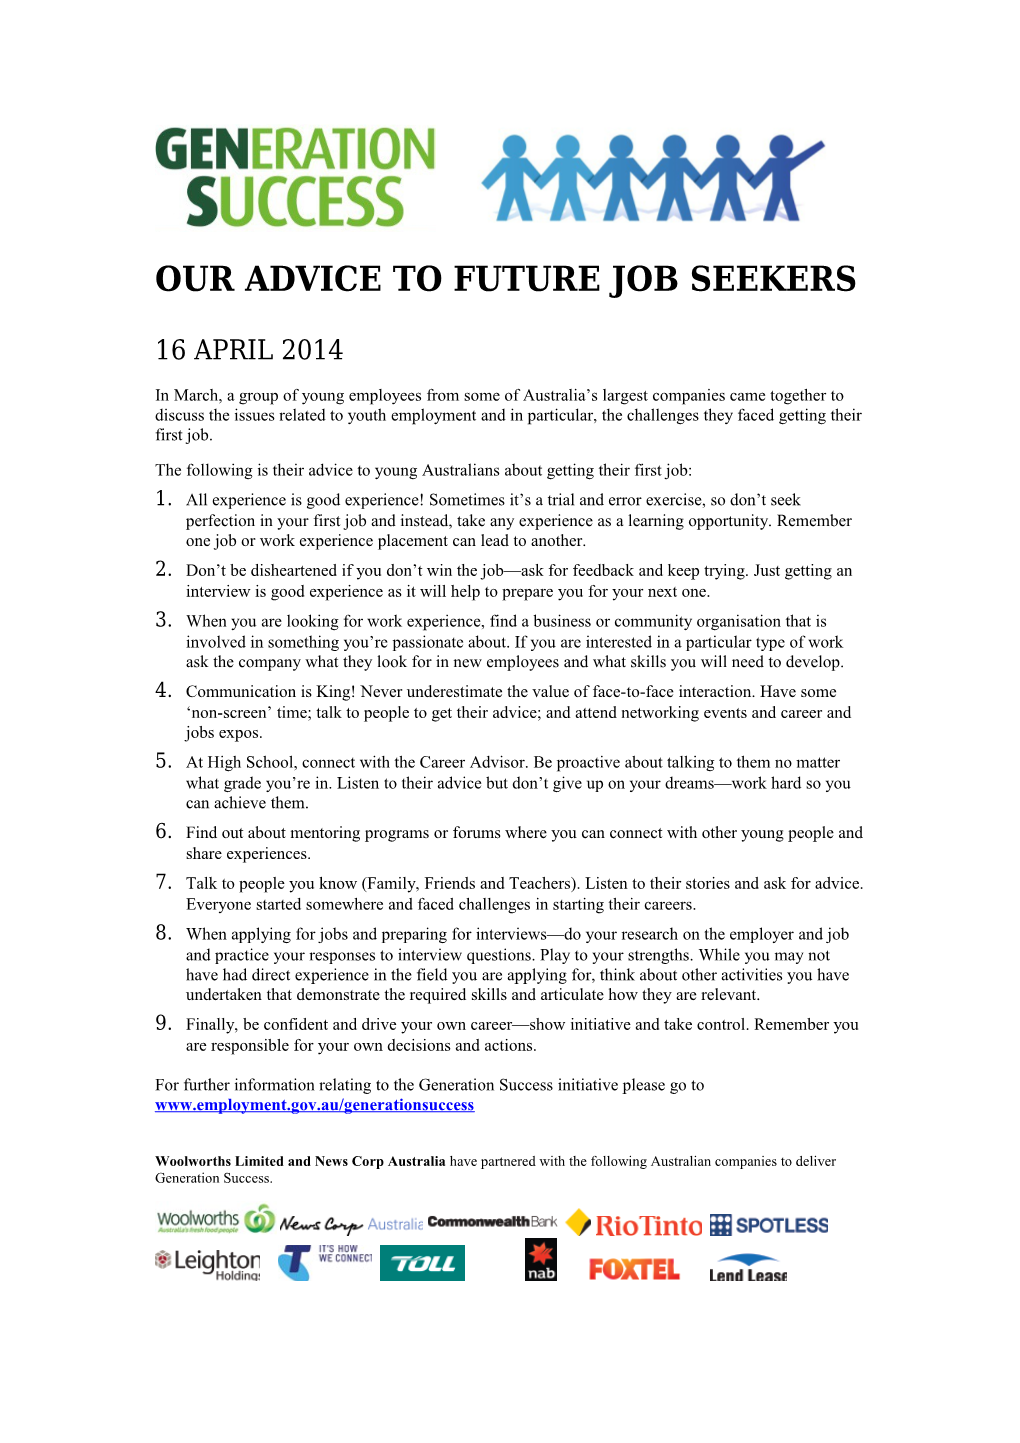 Our Advice to Future Job Seekers